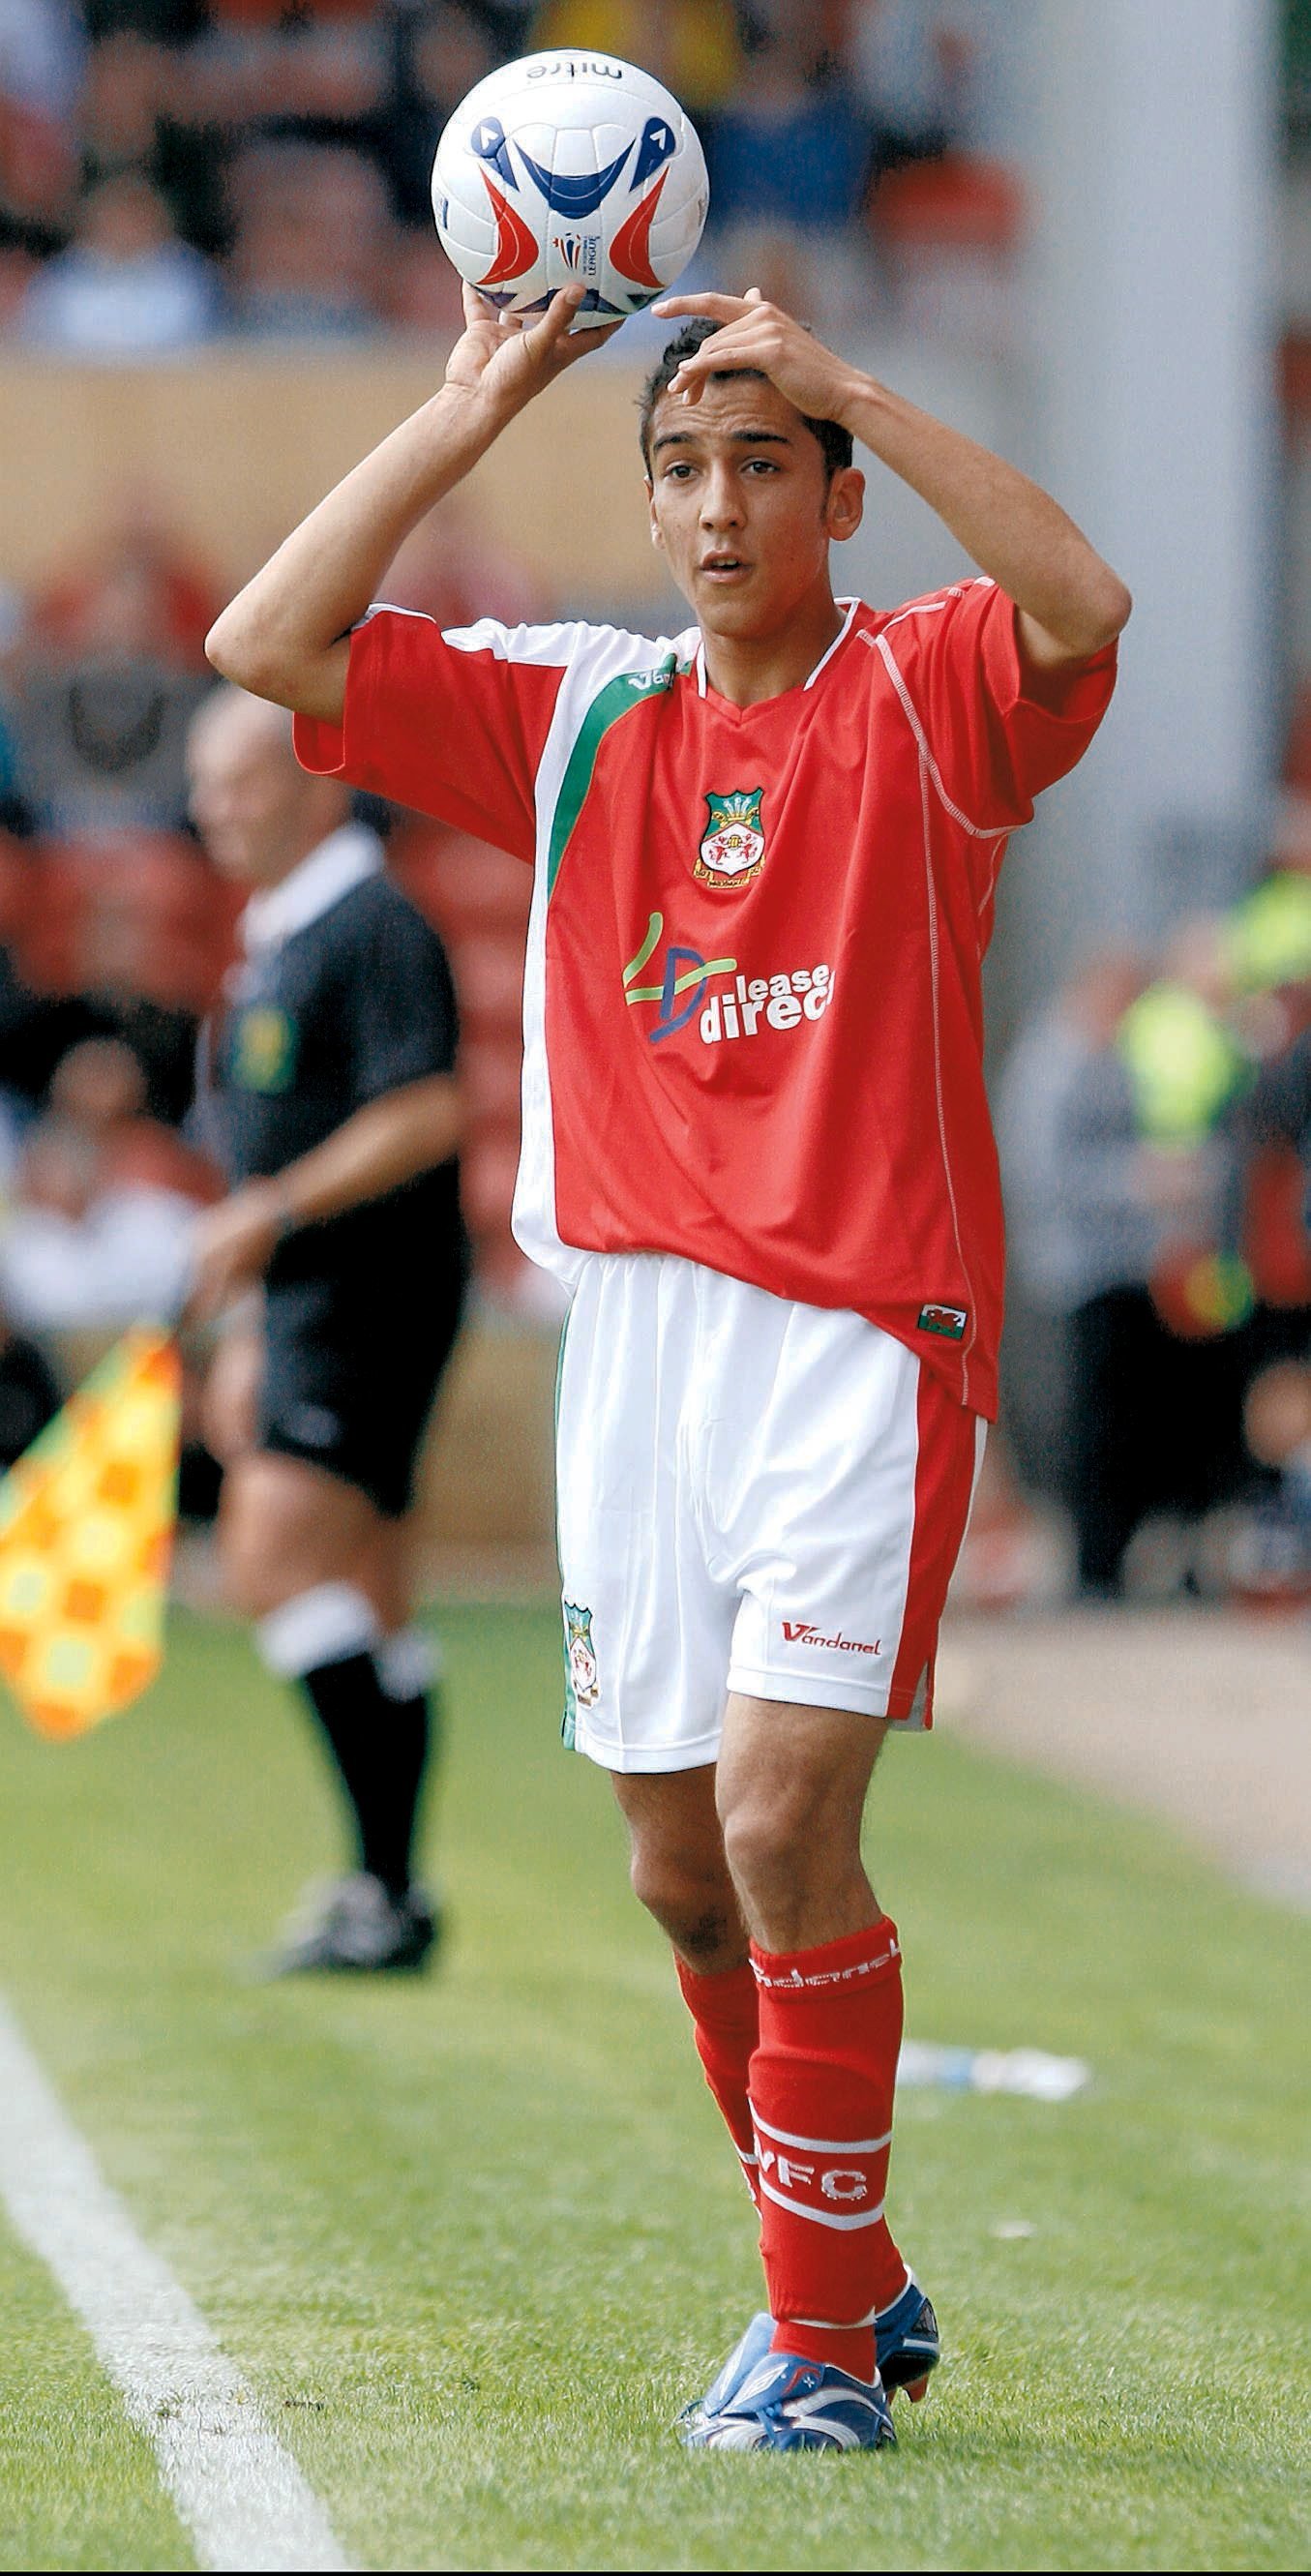 SWT070707a Wrexham vs Liverpool played at The Racecourse on the 7th July 2007 Liverpool Neil Taylor